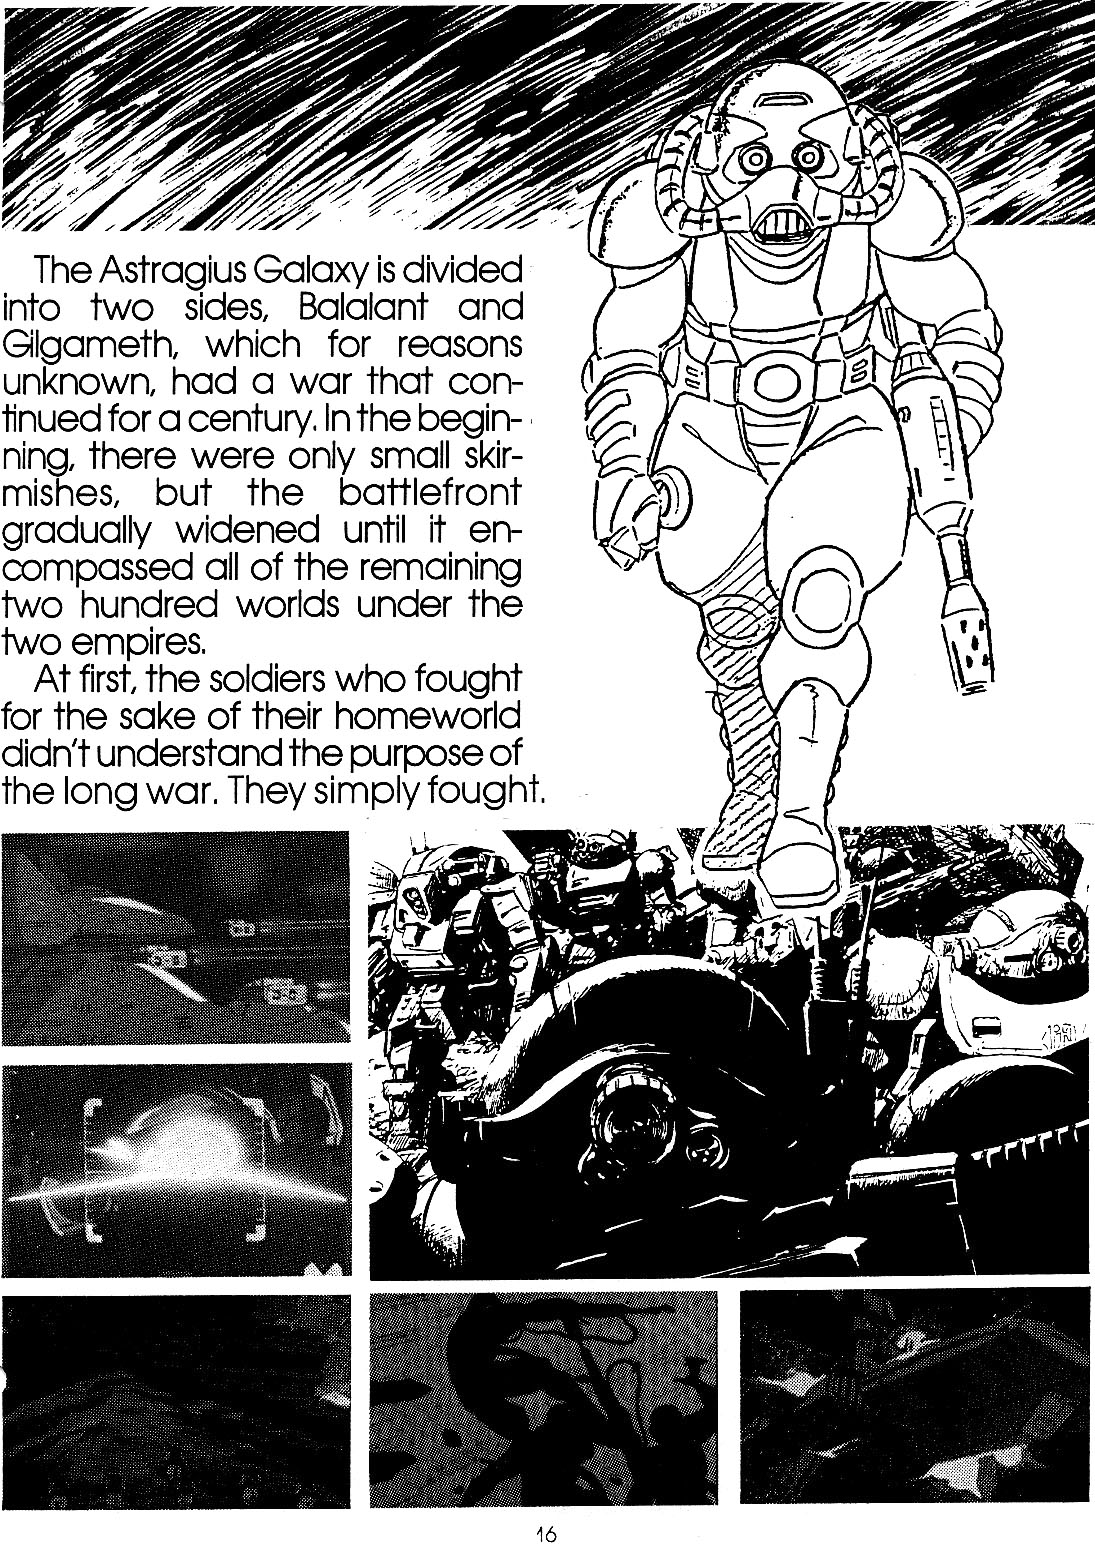 VOTOMS Viewing Guide 17